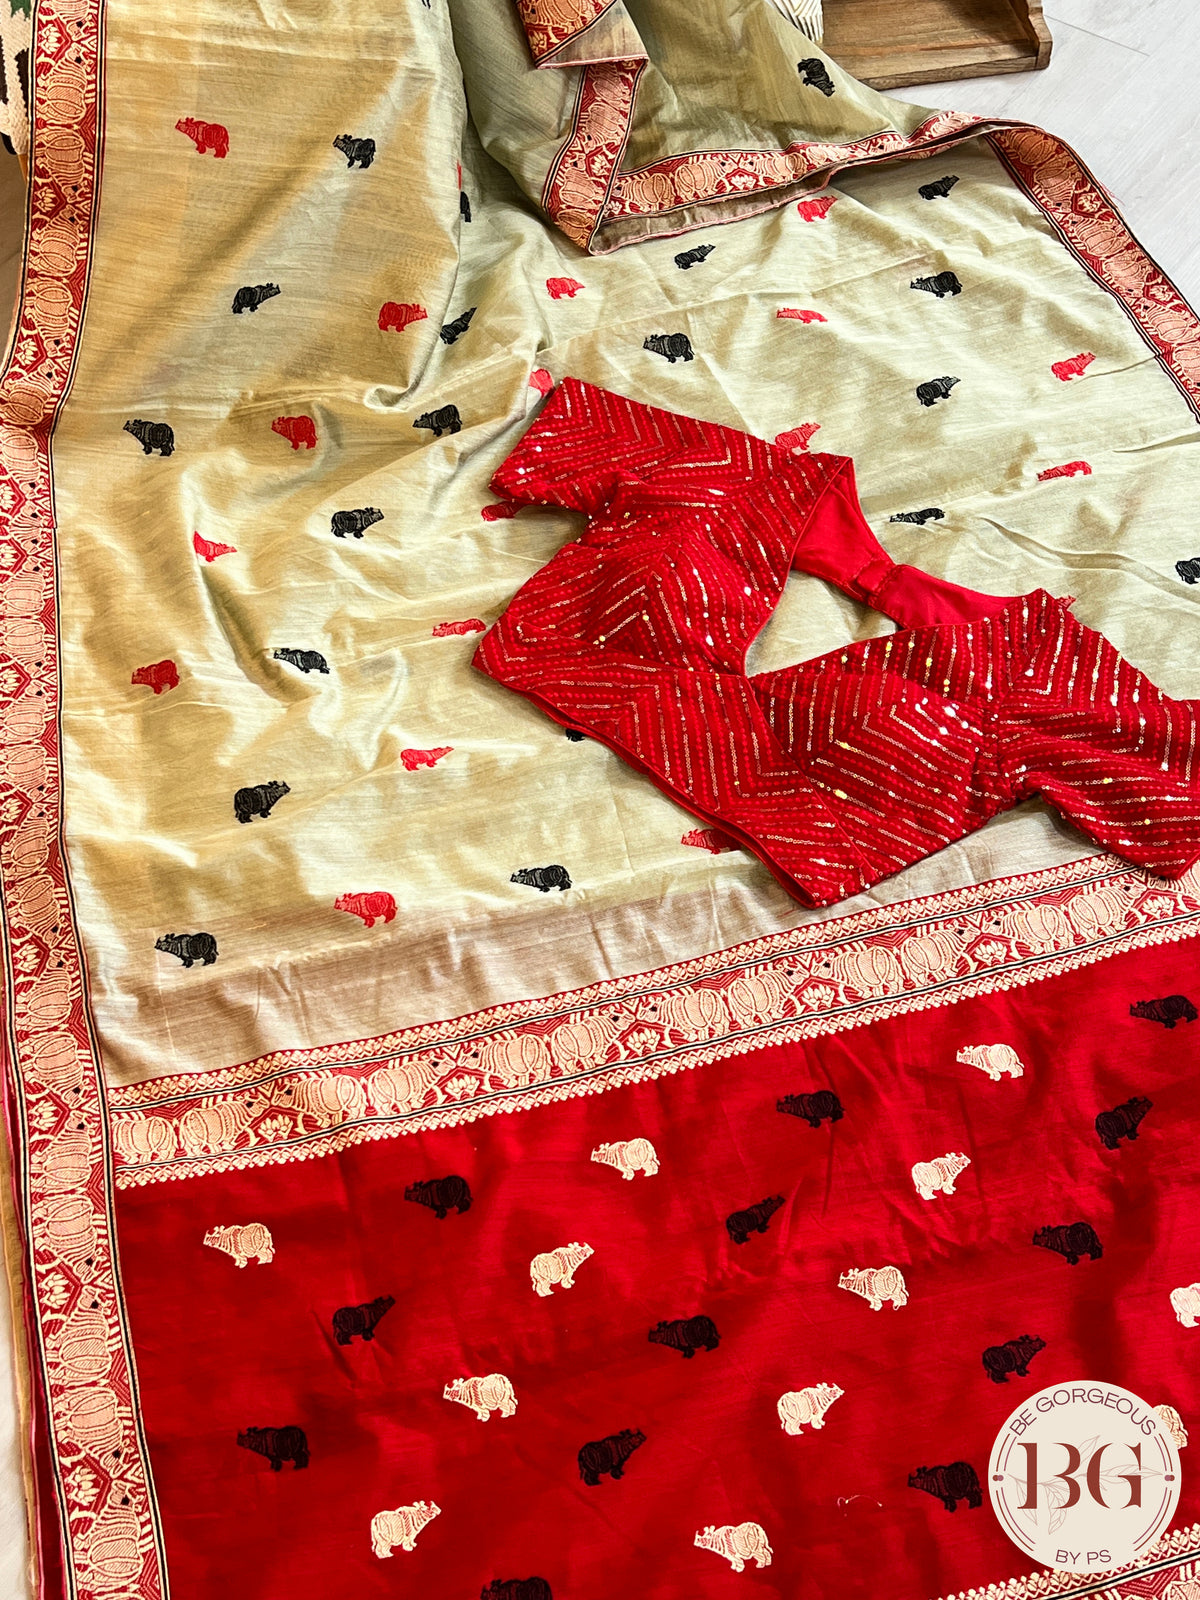 Kaziranga Assam Cotton Blend Saree in red and pista green color with rhino motifs